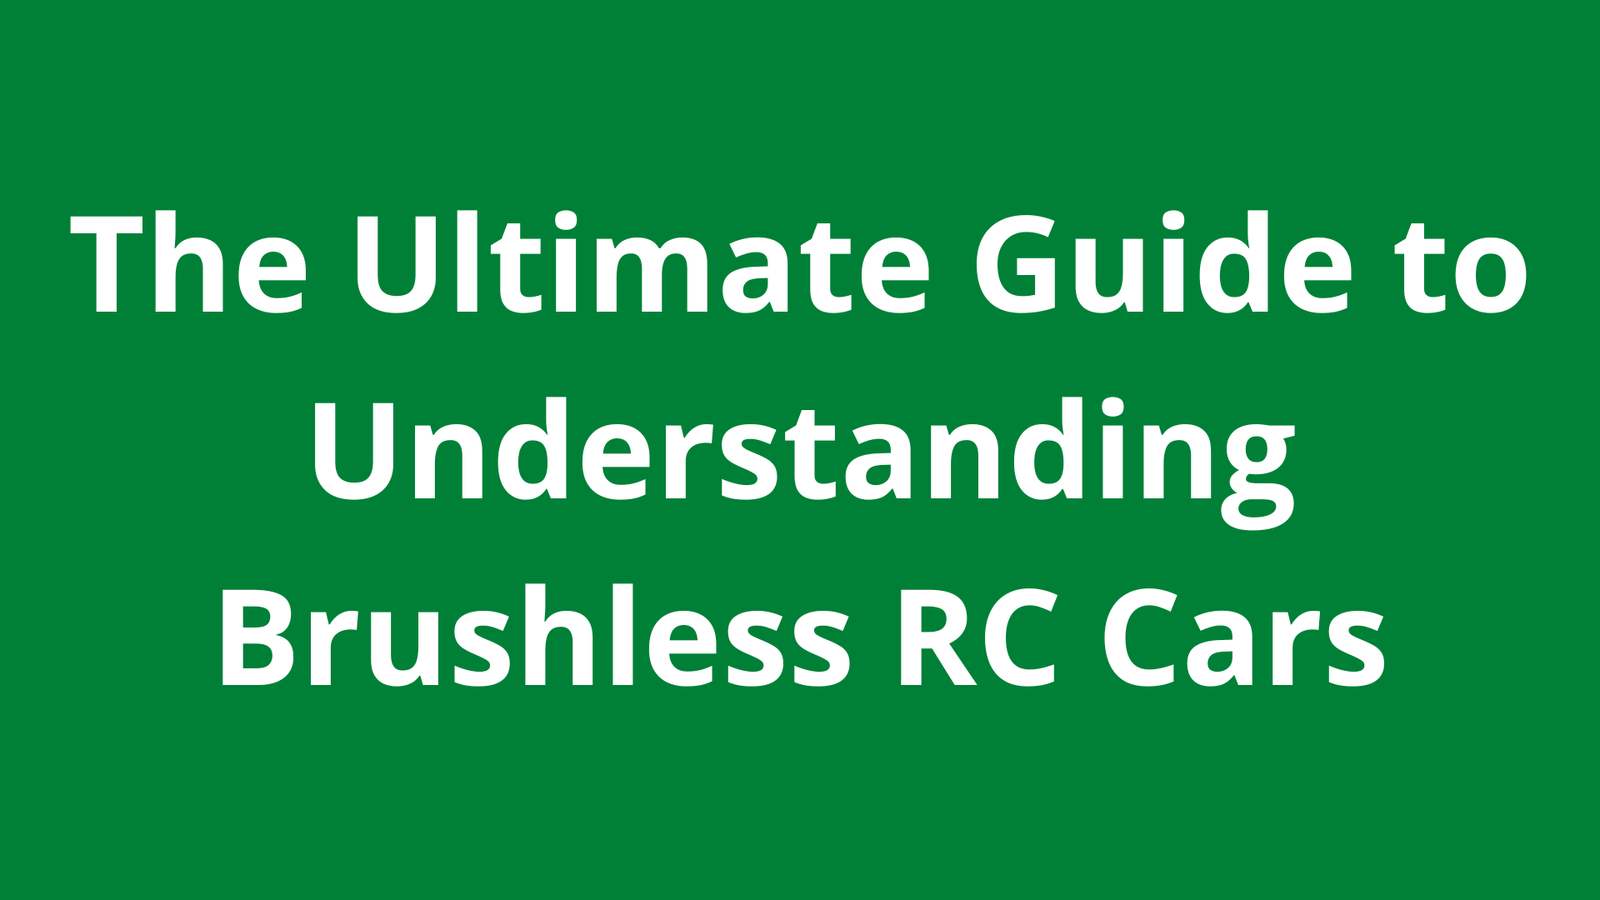 The Ultimate Guide to Understanding Brushless RC Cars